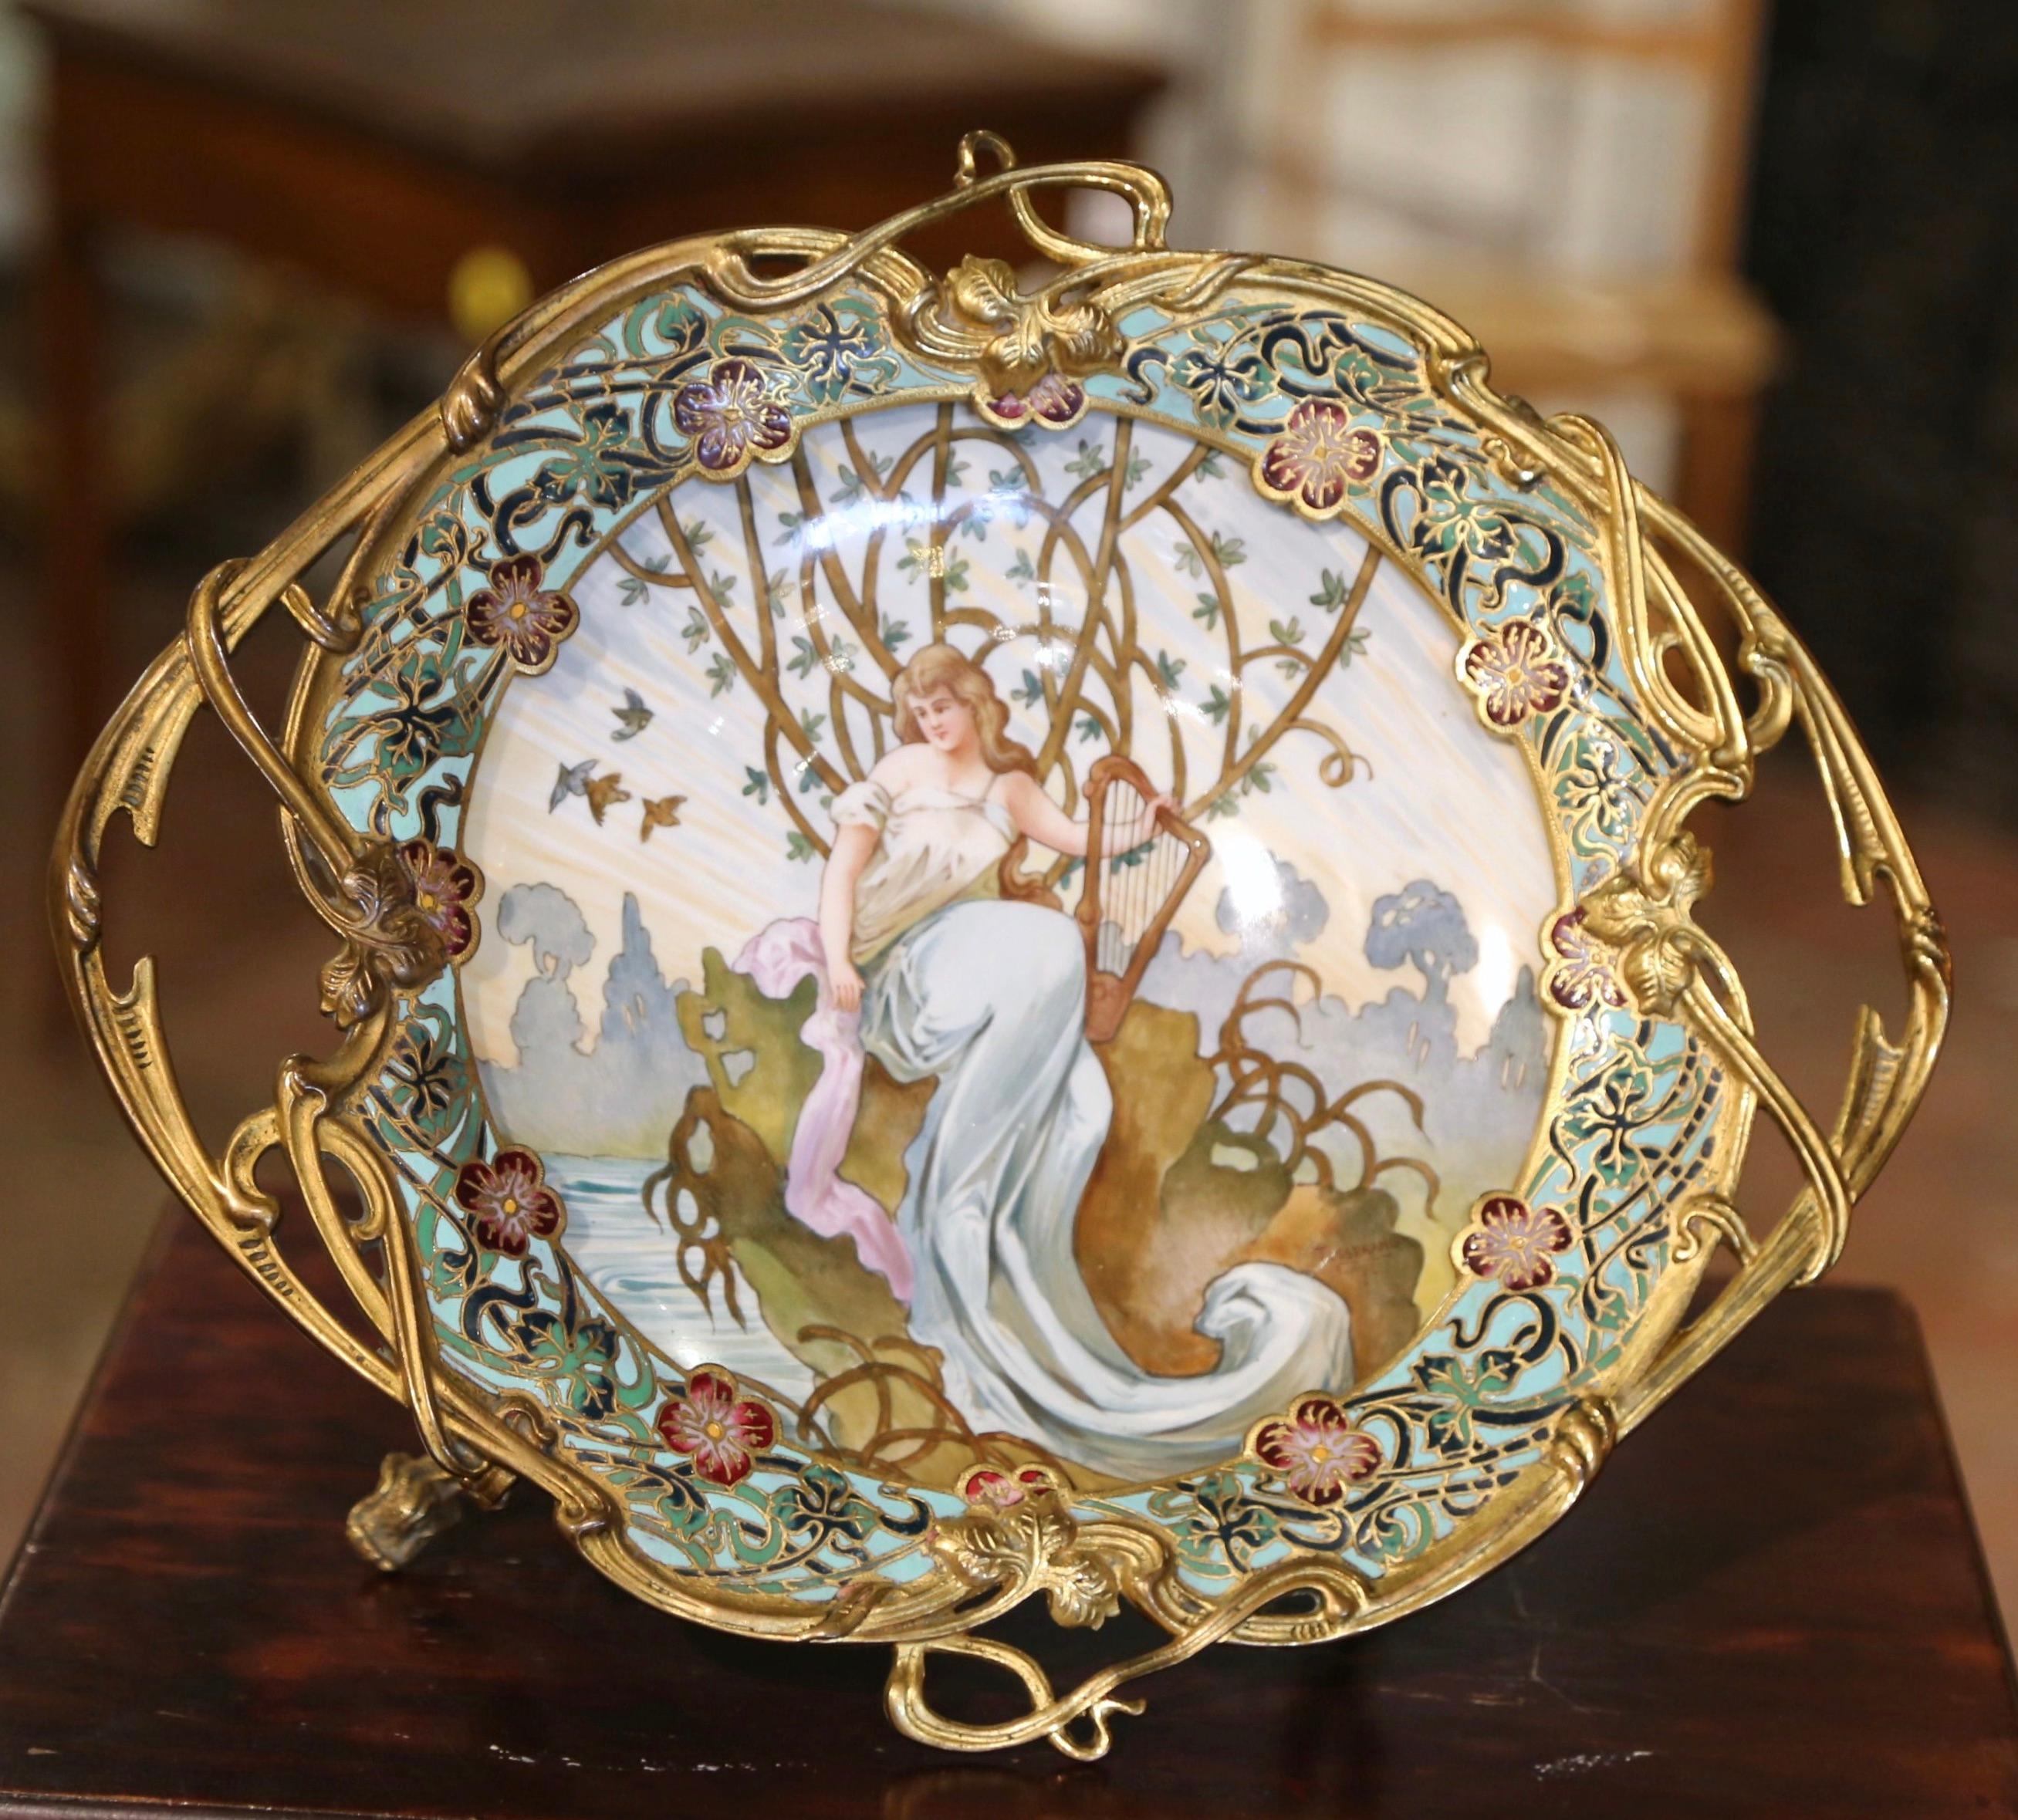 19th Century French Champlevé Enamel and Porcelain Centerpiece Signed Tisserand In Good Condition For Sale In Dallas, TX